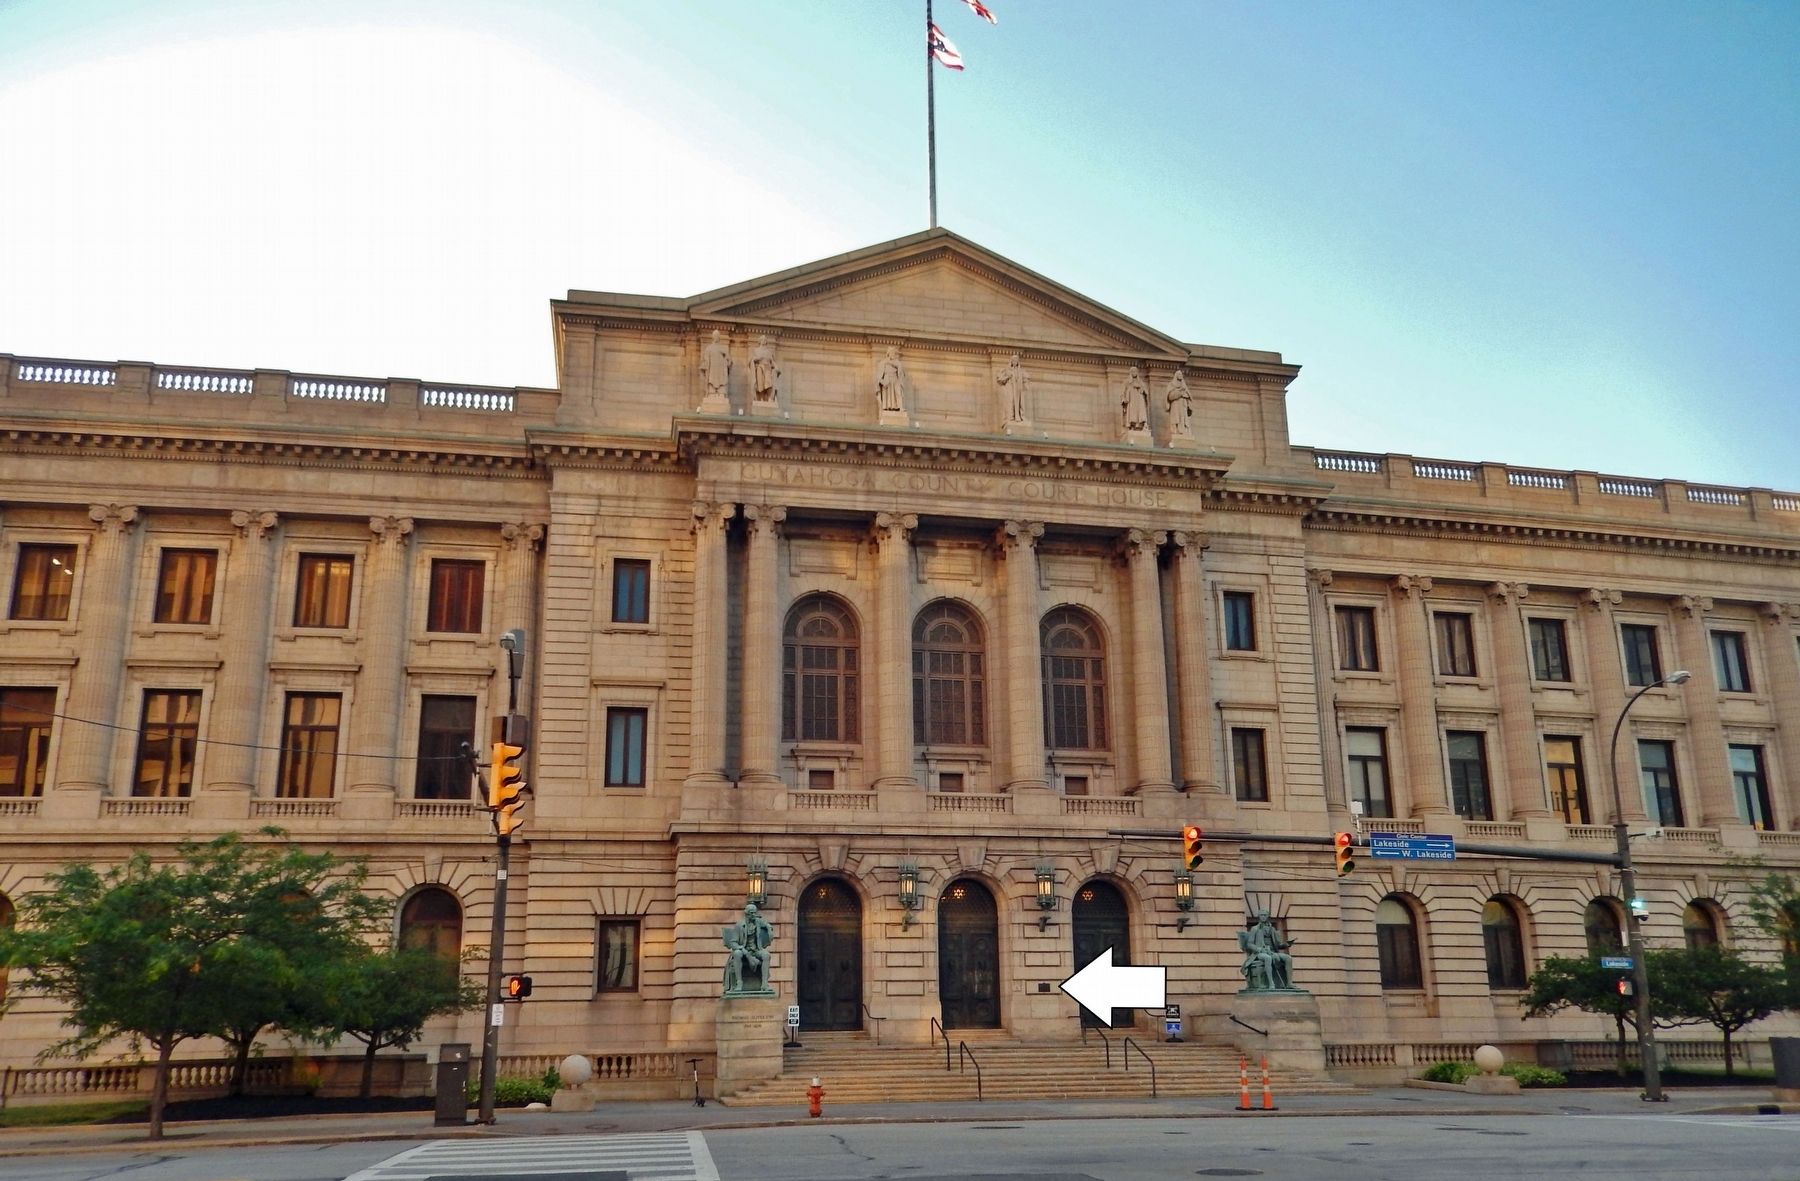 Cuyahoga County Courthouse (<i>front/south elevation</i>) image. Click for full size.